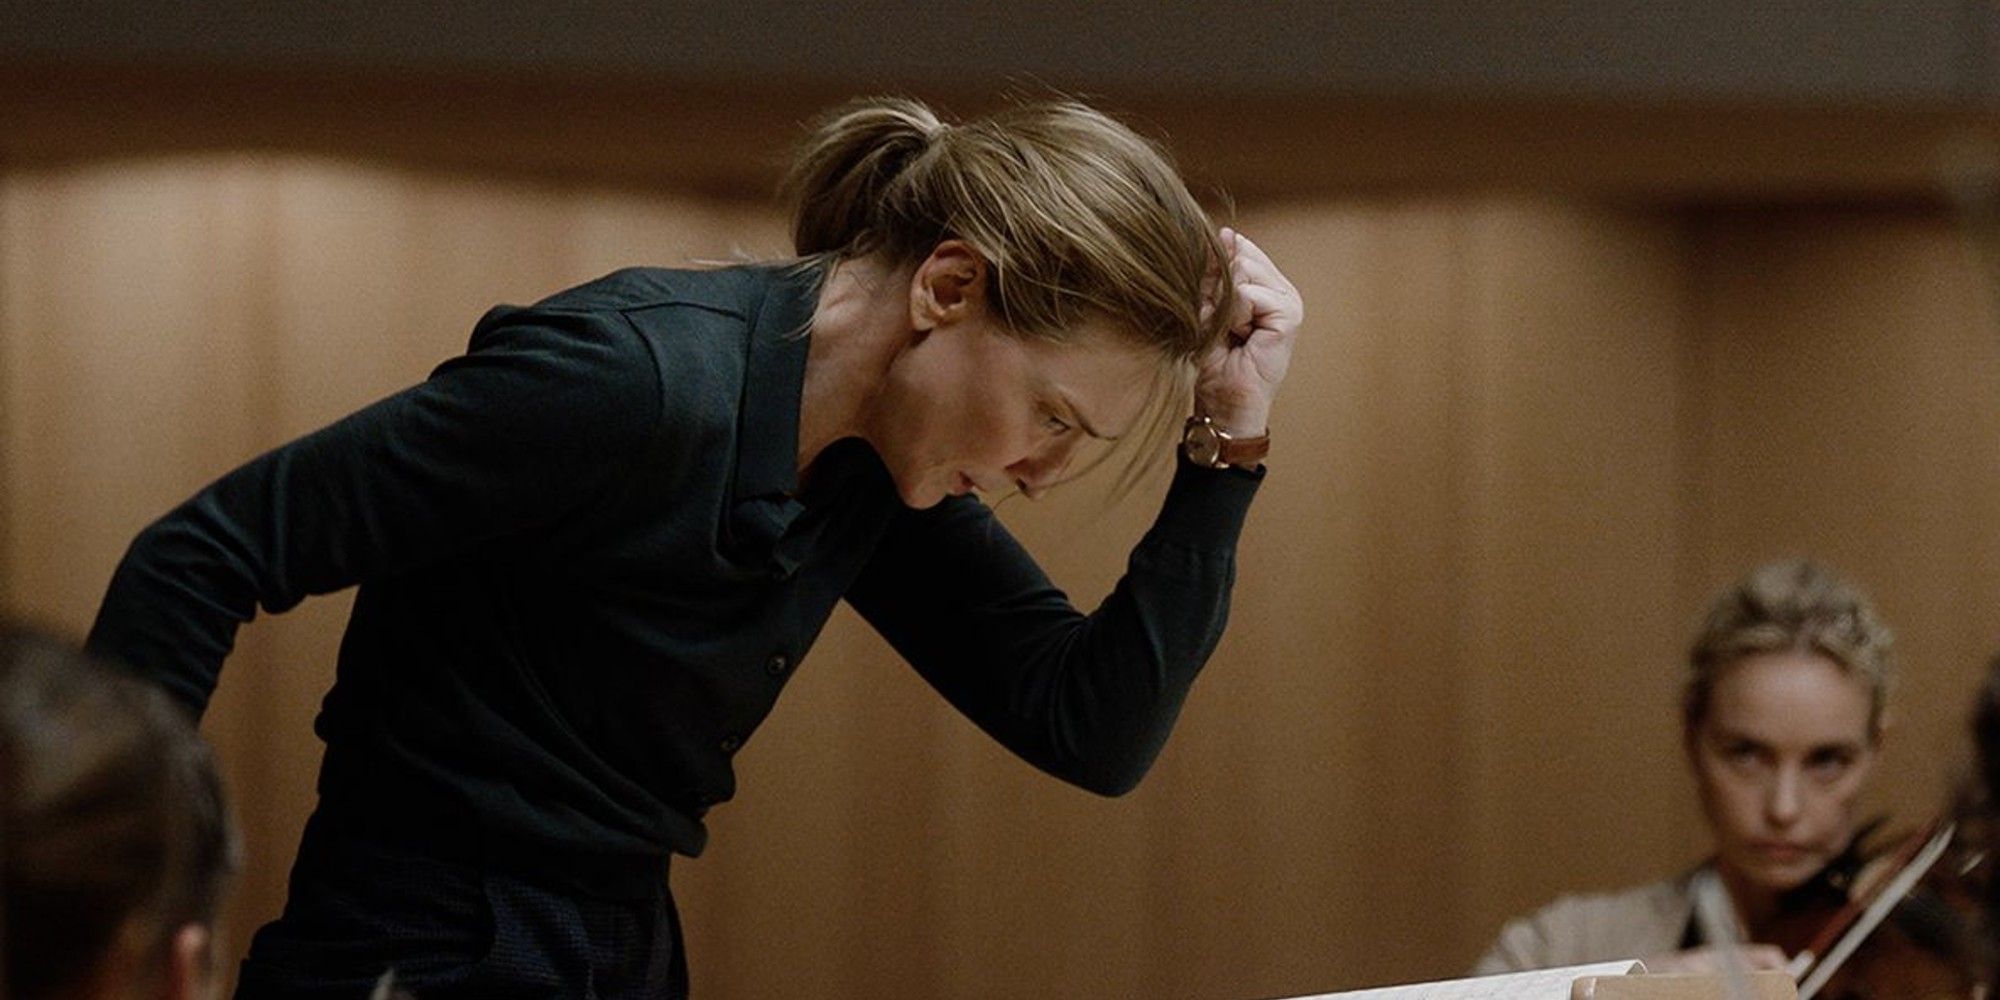 Lydia Tár (Cate Blanchett) impassioned as she conducts her orchestra in 'Tár'.